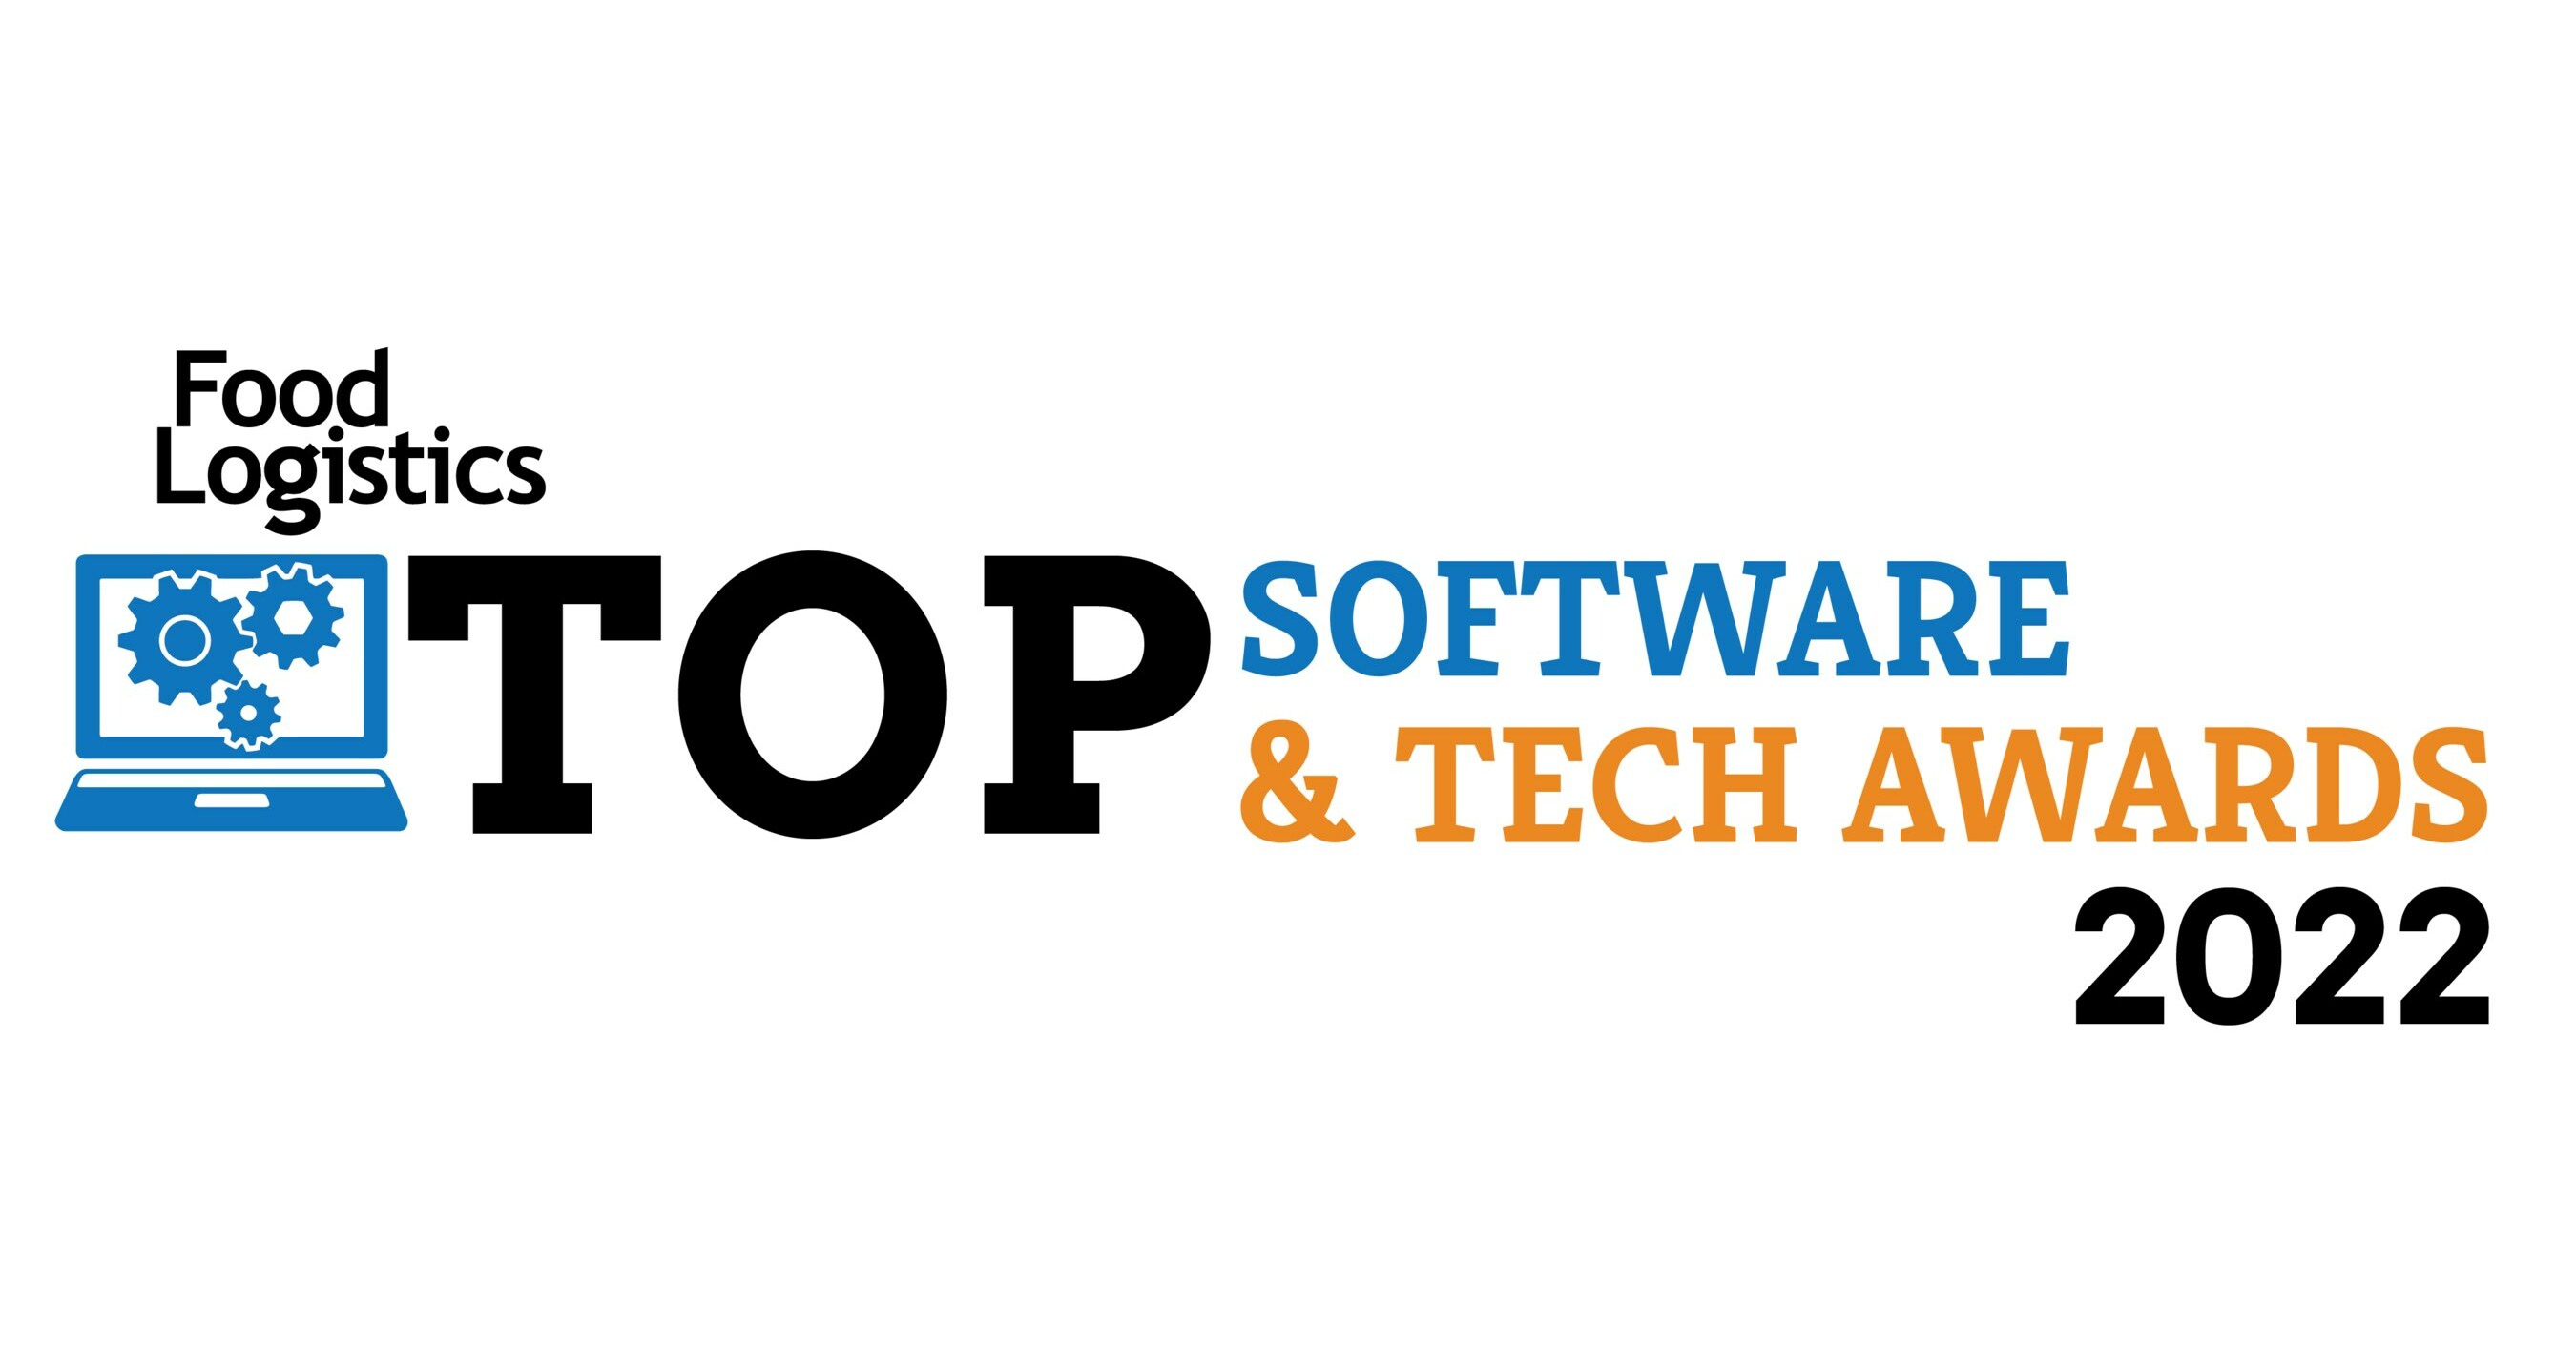  Food Logistics Names Turvo 2022 Top Software & Technology Provider for Second Consecutive Year 